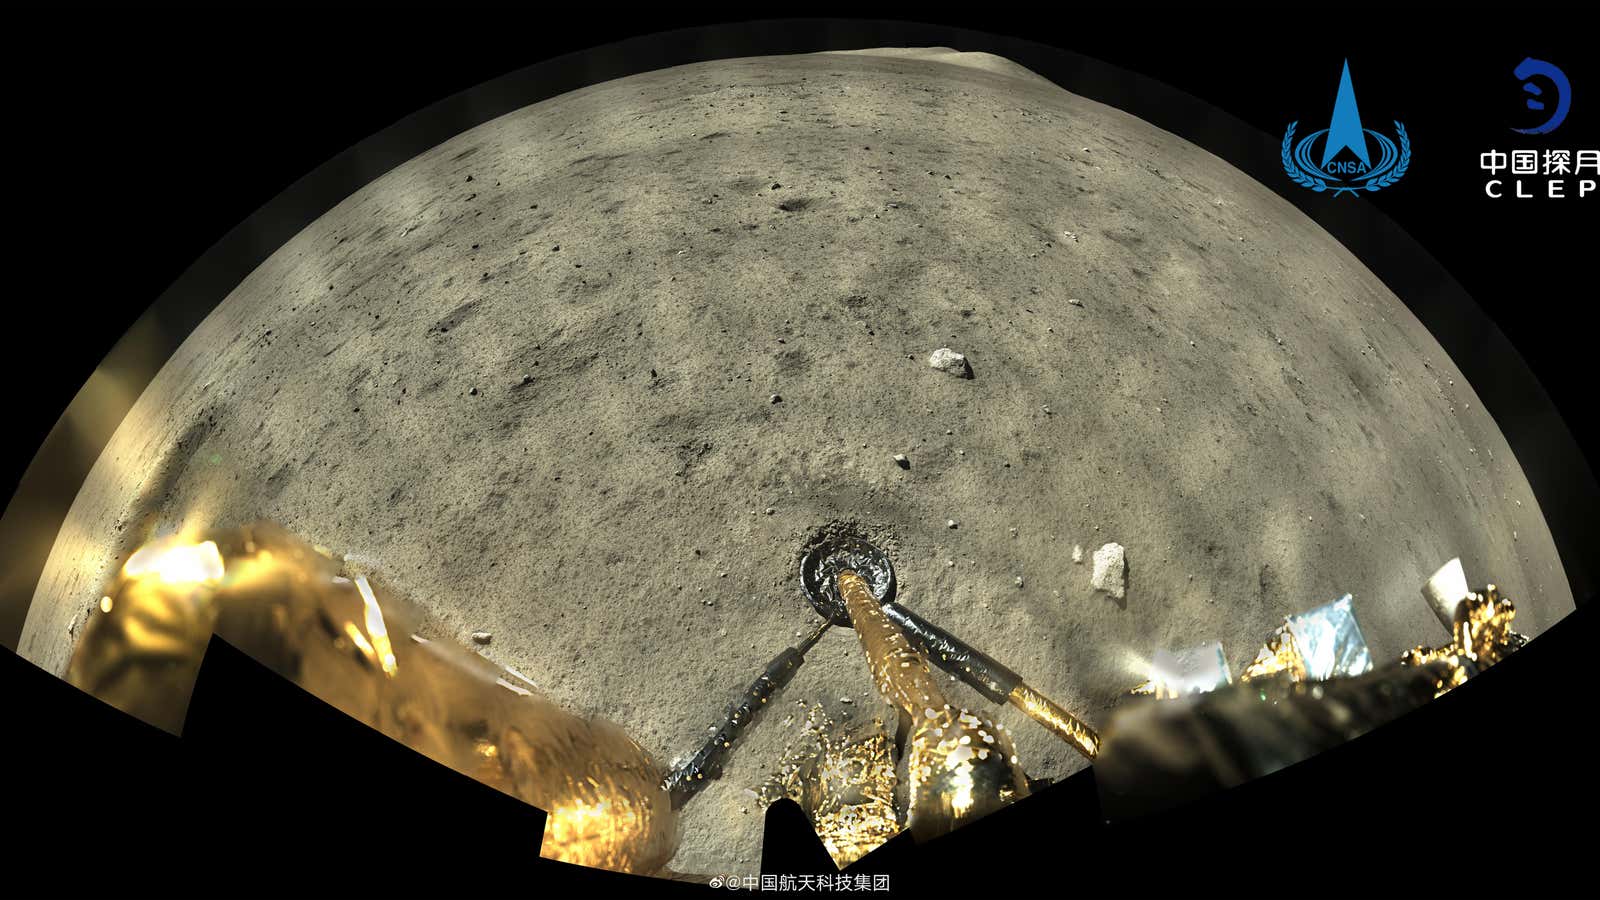 A lunar panorama snapped by China’s Chang’e 5 moon lander.